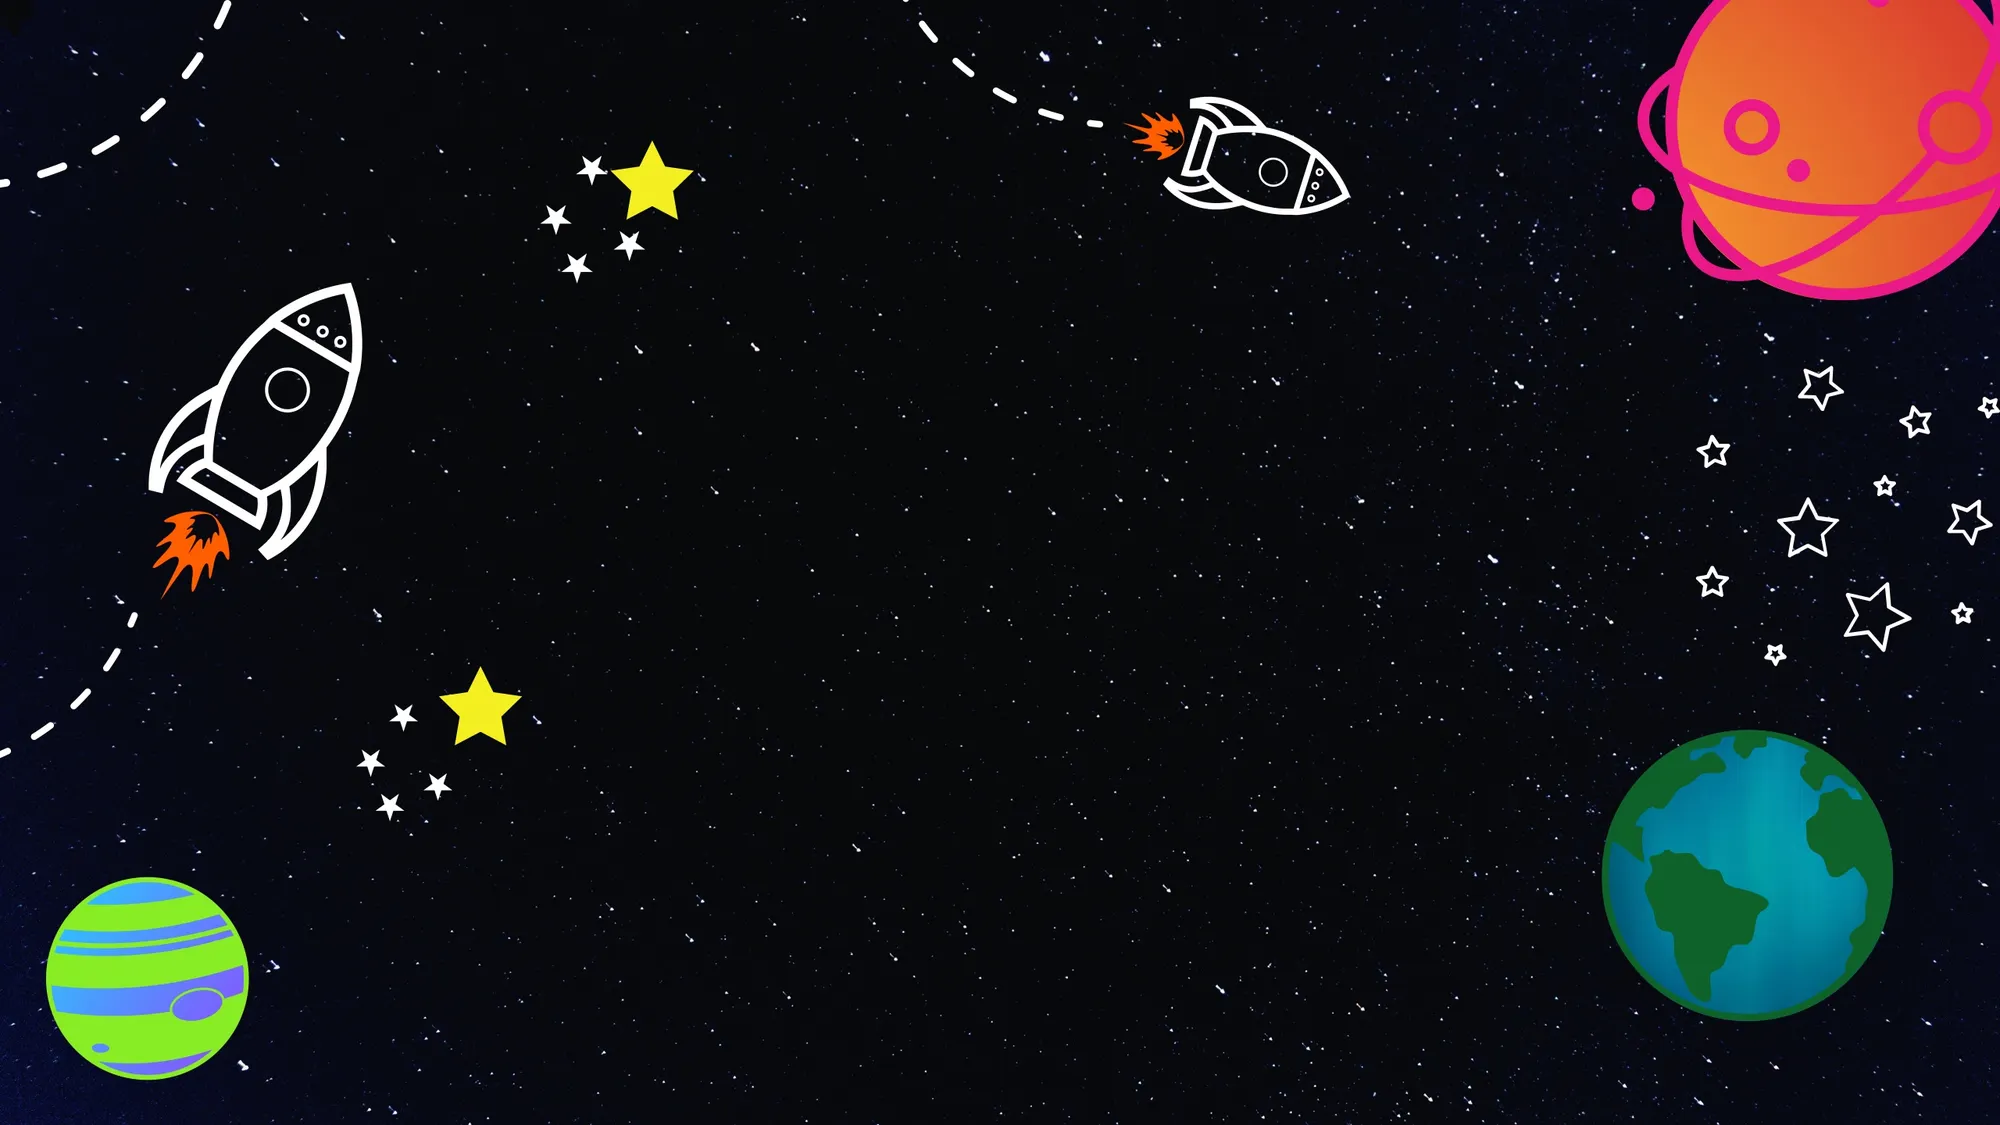 Cartoon Space with Rockets and Planets Illustration Childrens Desktop Background